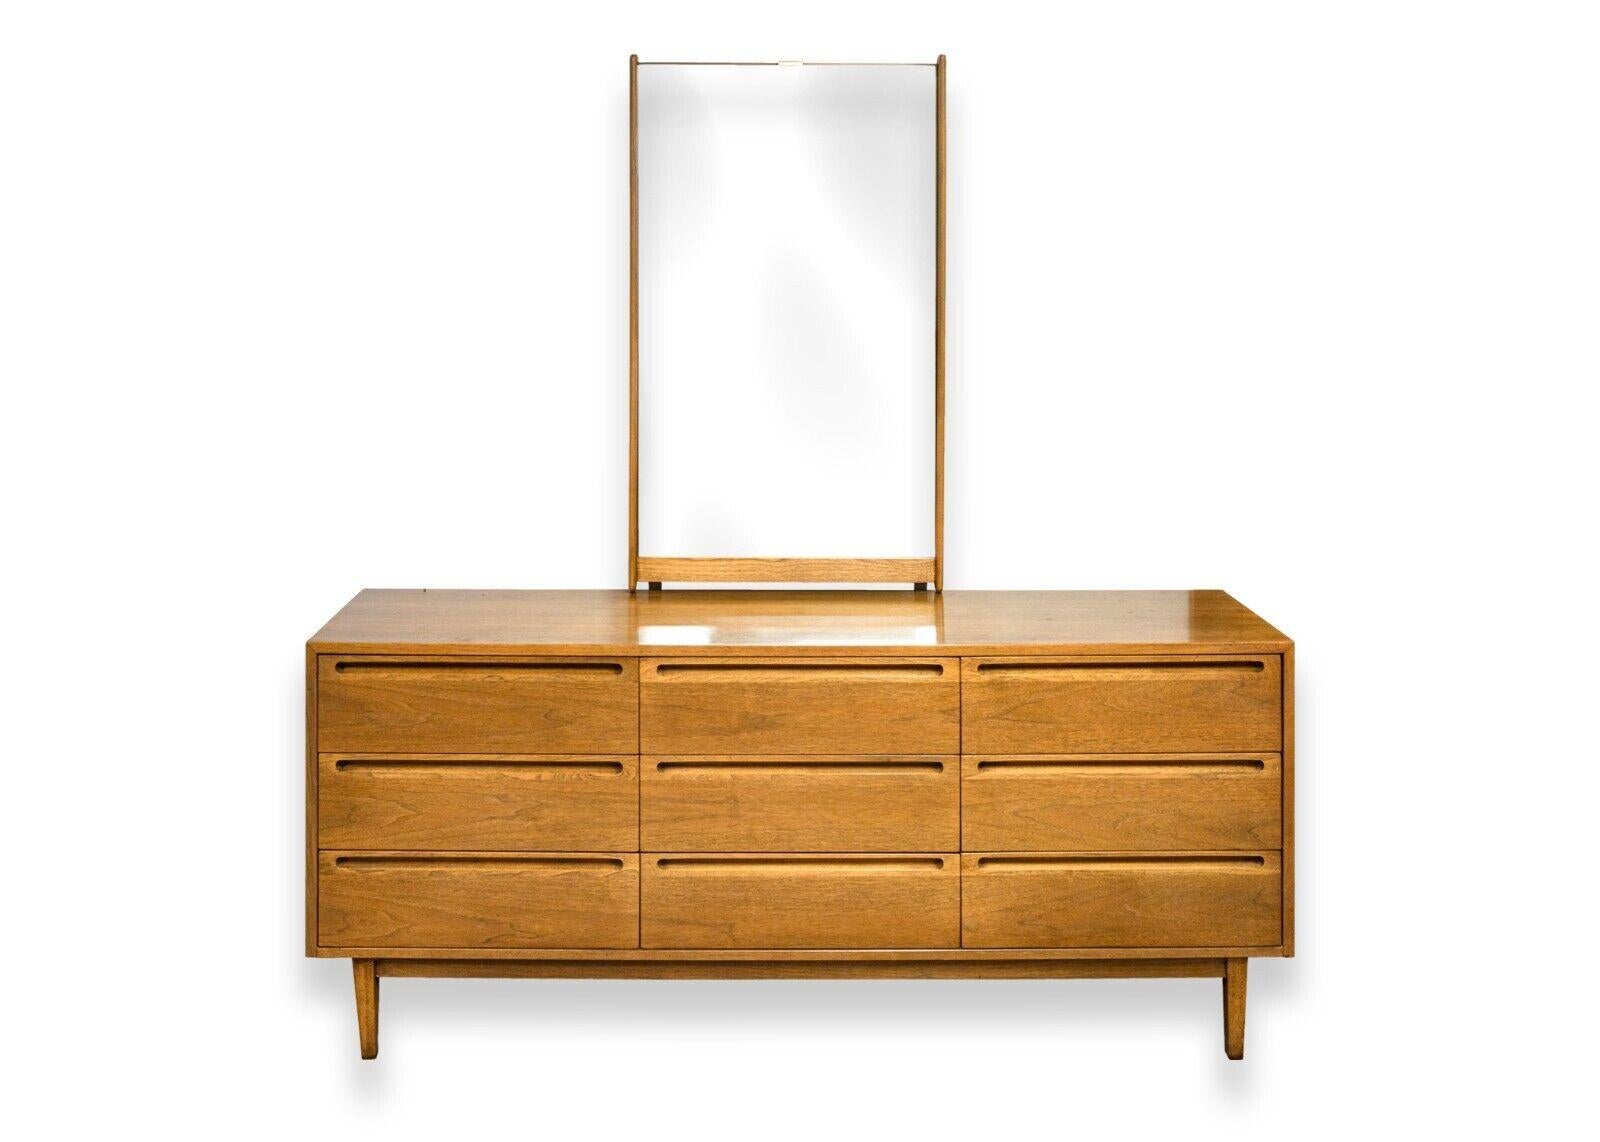 A mid century modern American of Martinsville 6pc bedroom set. This is a truly wonderful set of mid century bedroom furniture. The set includes a dresser with an attached vanity mirror, a tall boy dresser, a queen size headboard, and 2 matching side